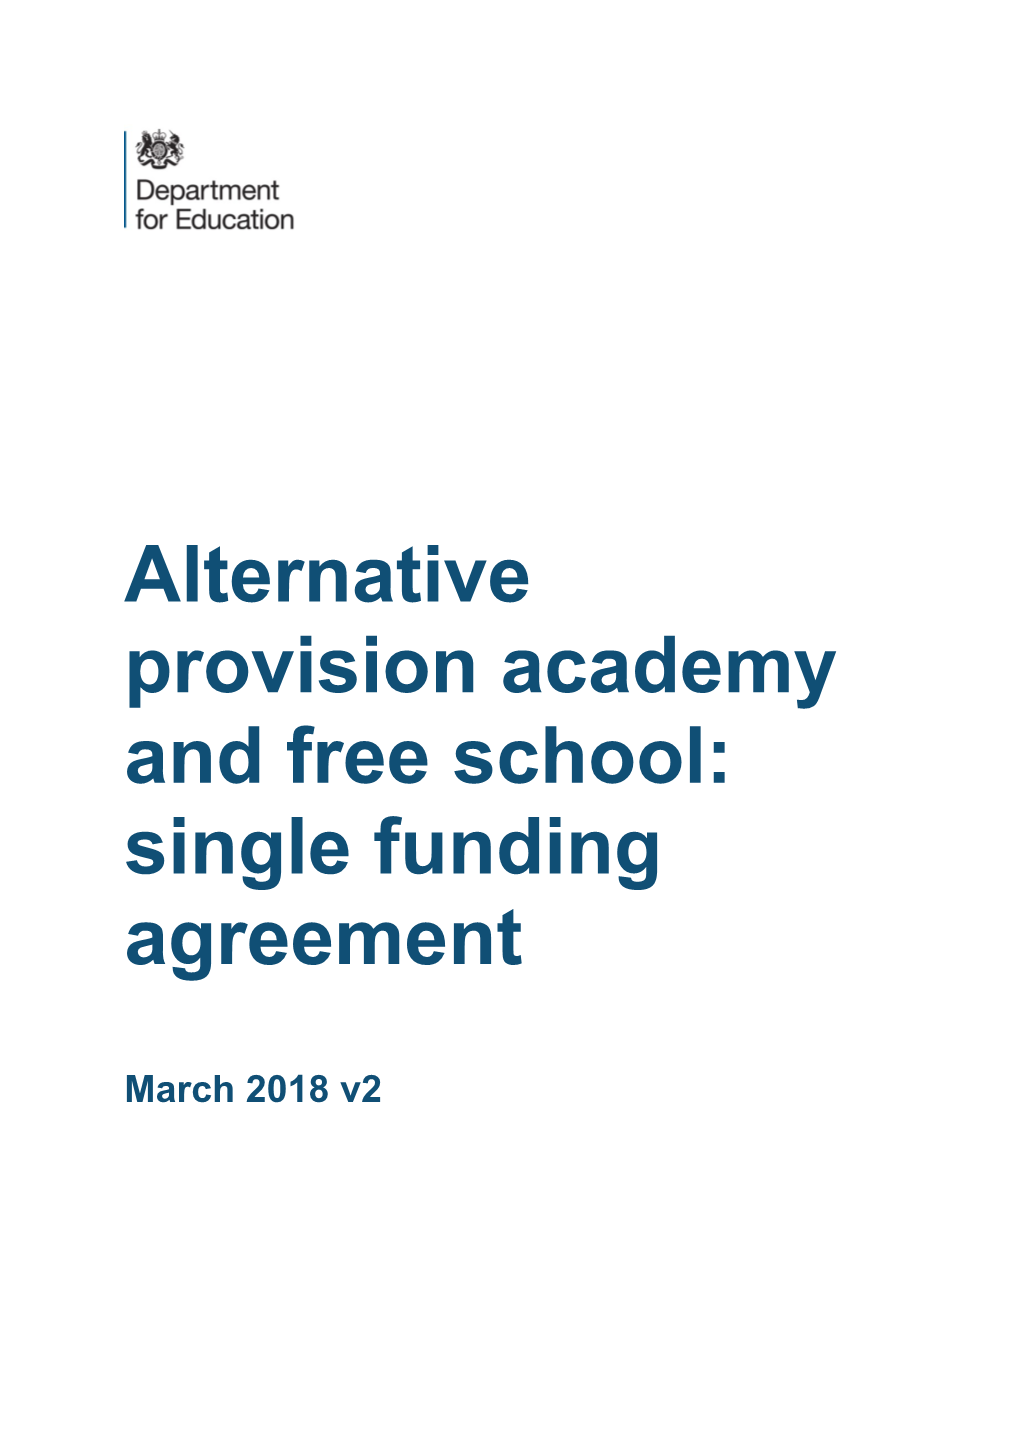 Alternative Provision Academy and Free School: Single Funding Agreement March 18 V2